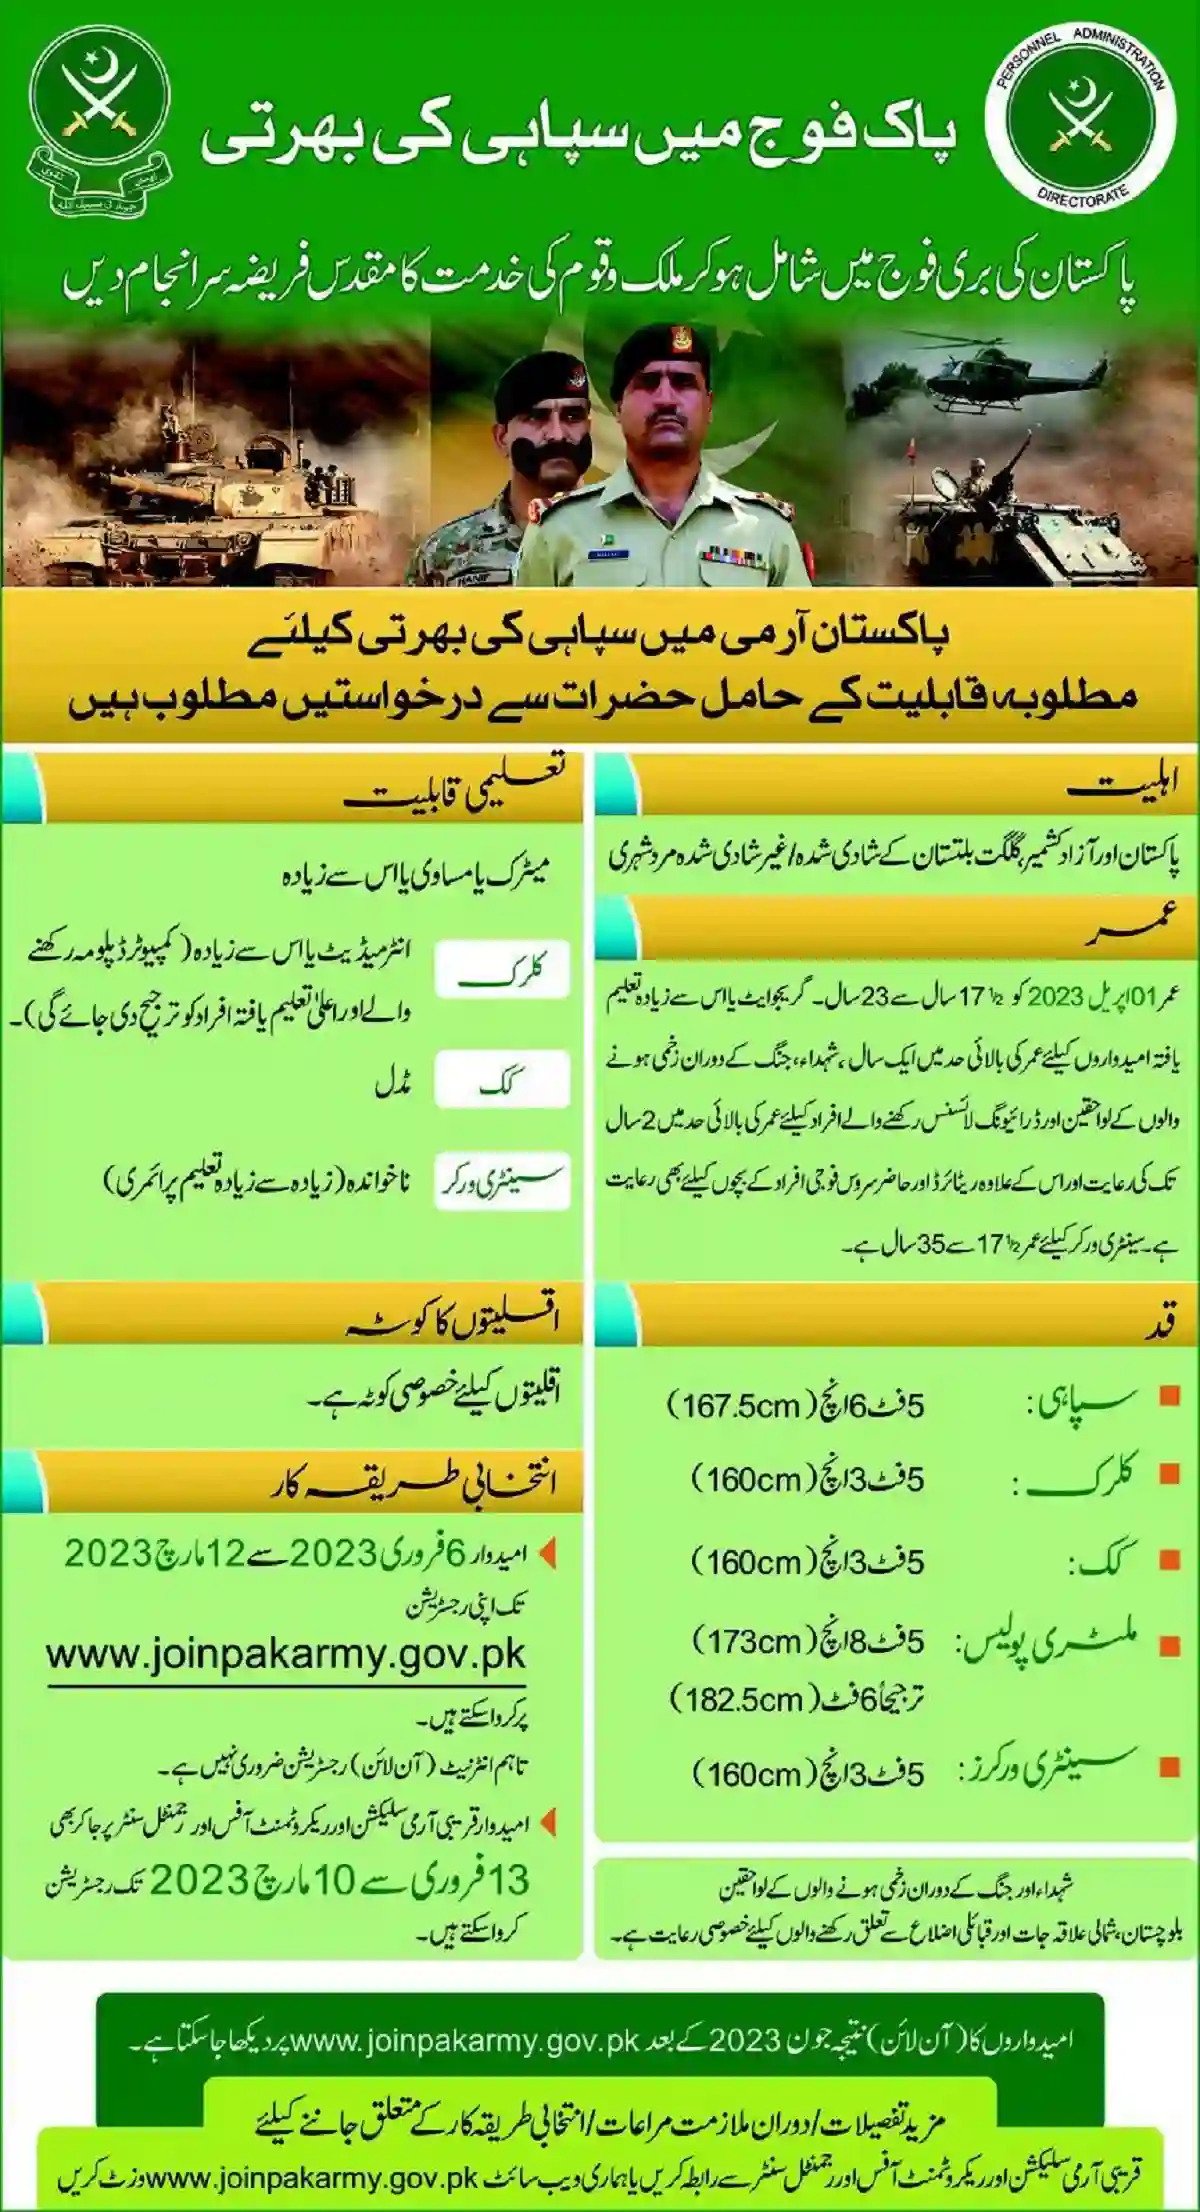 Join Pakistan Army Jobs 2023 as Soldier